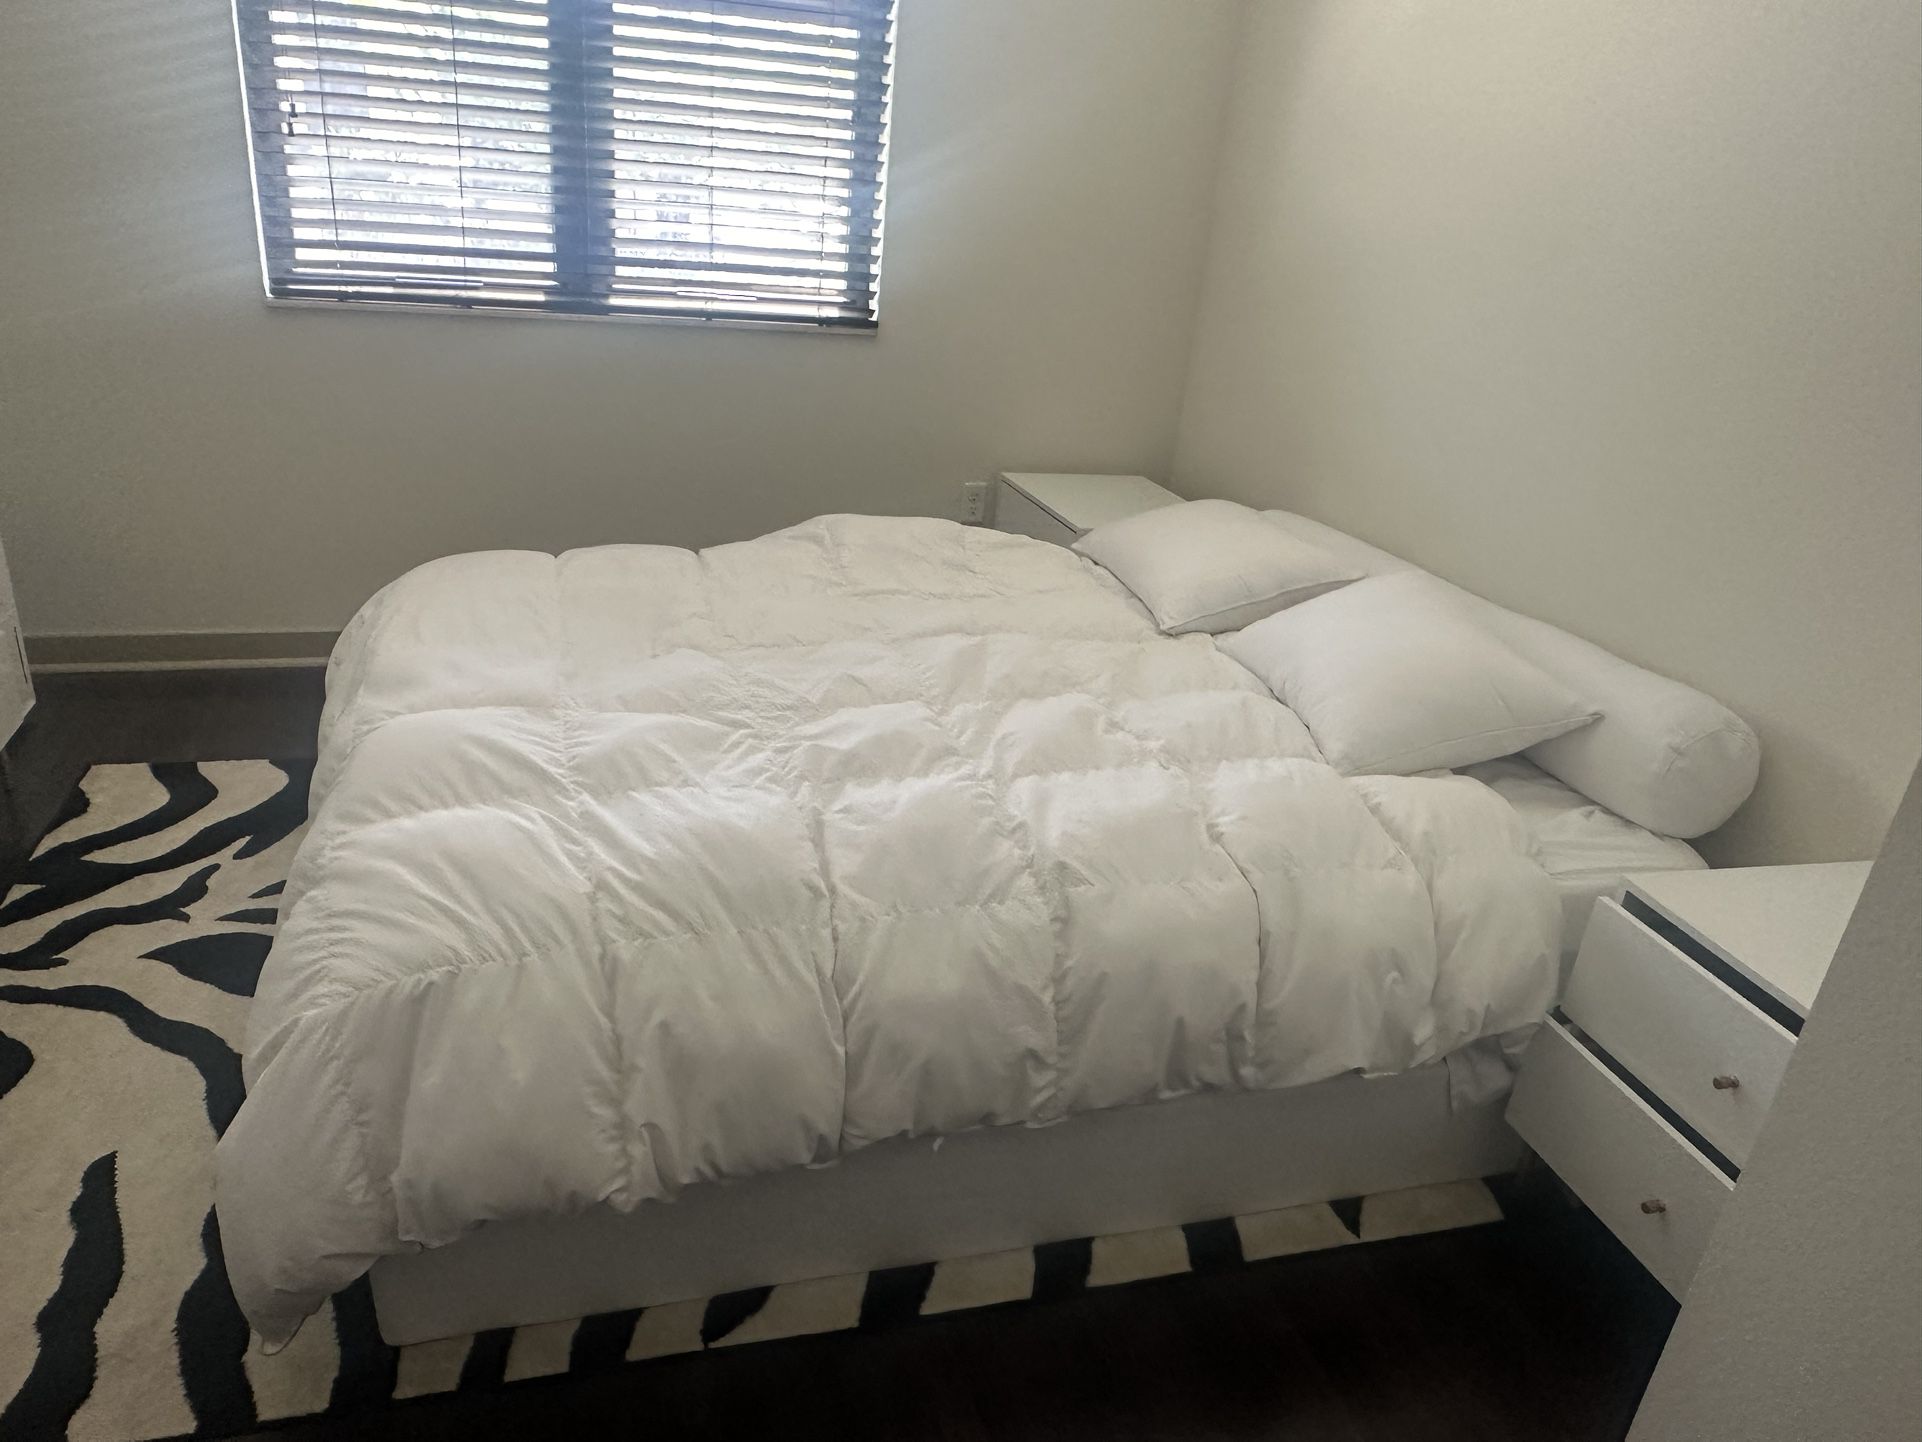 Queen Size Bed Frame With Mattress